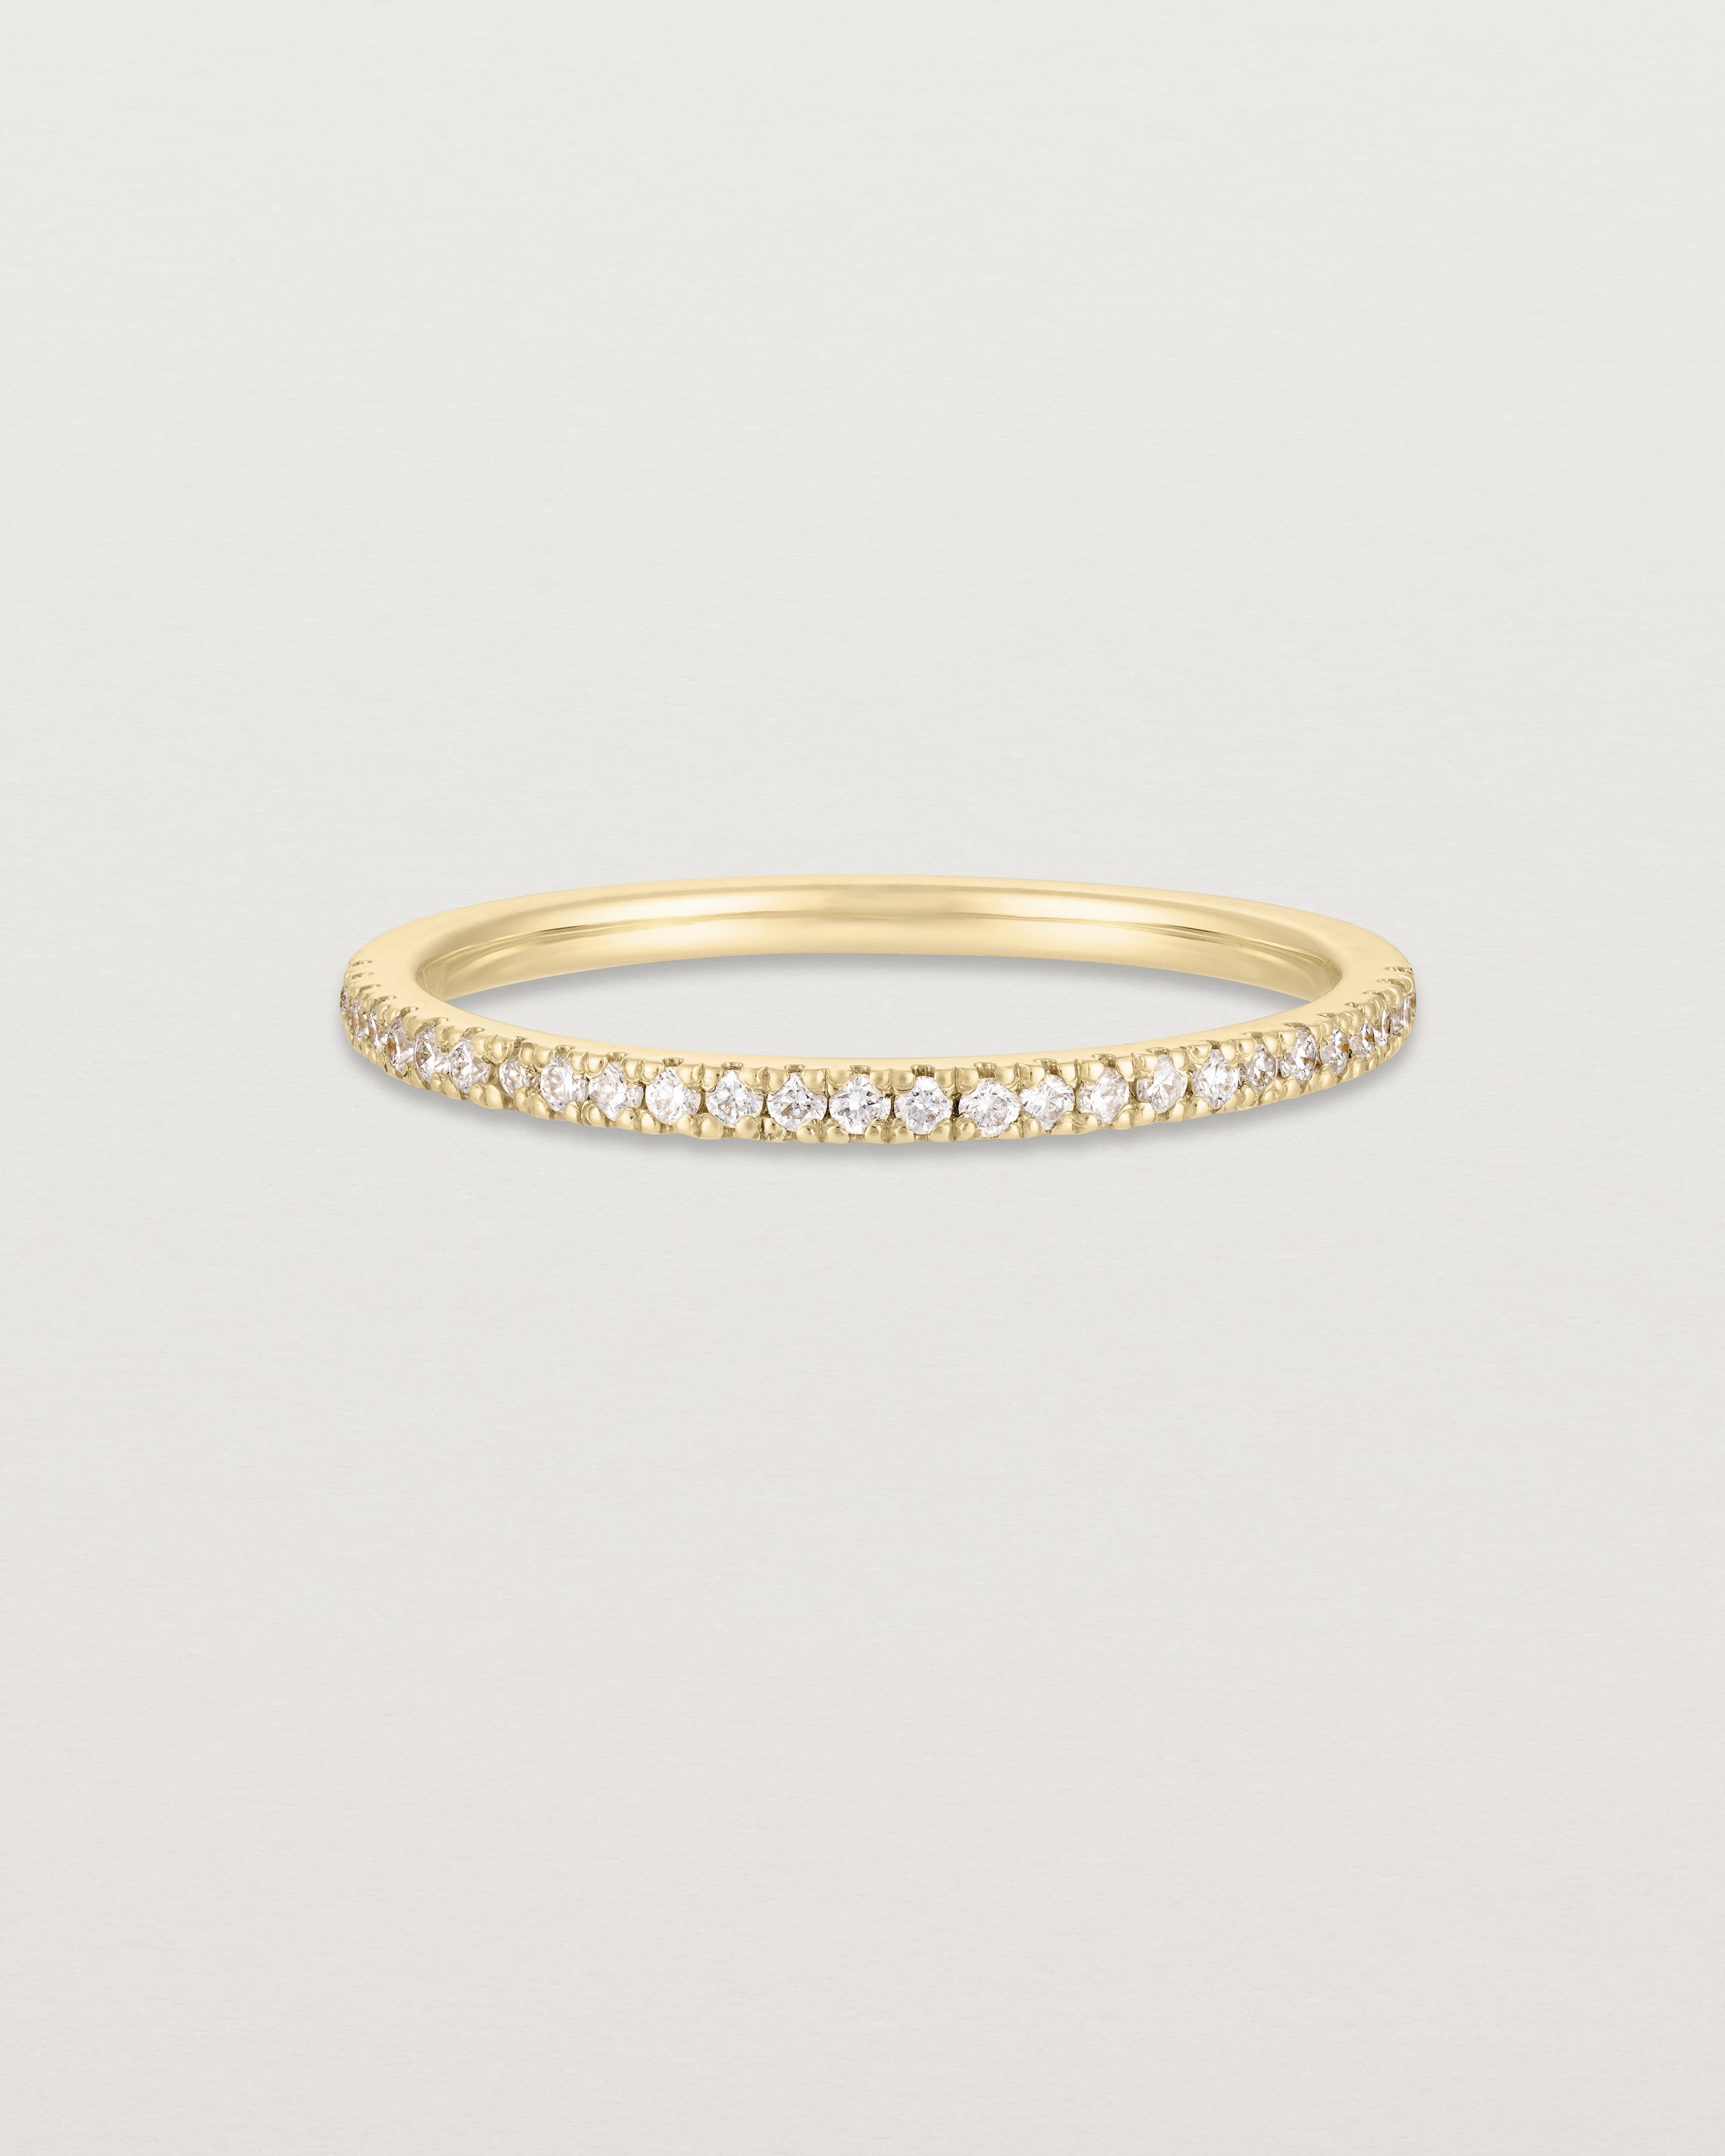 Front view of the Demi Queenie | White Diamonds in yellow gold.